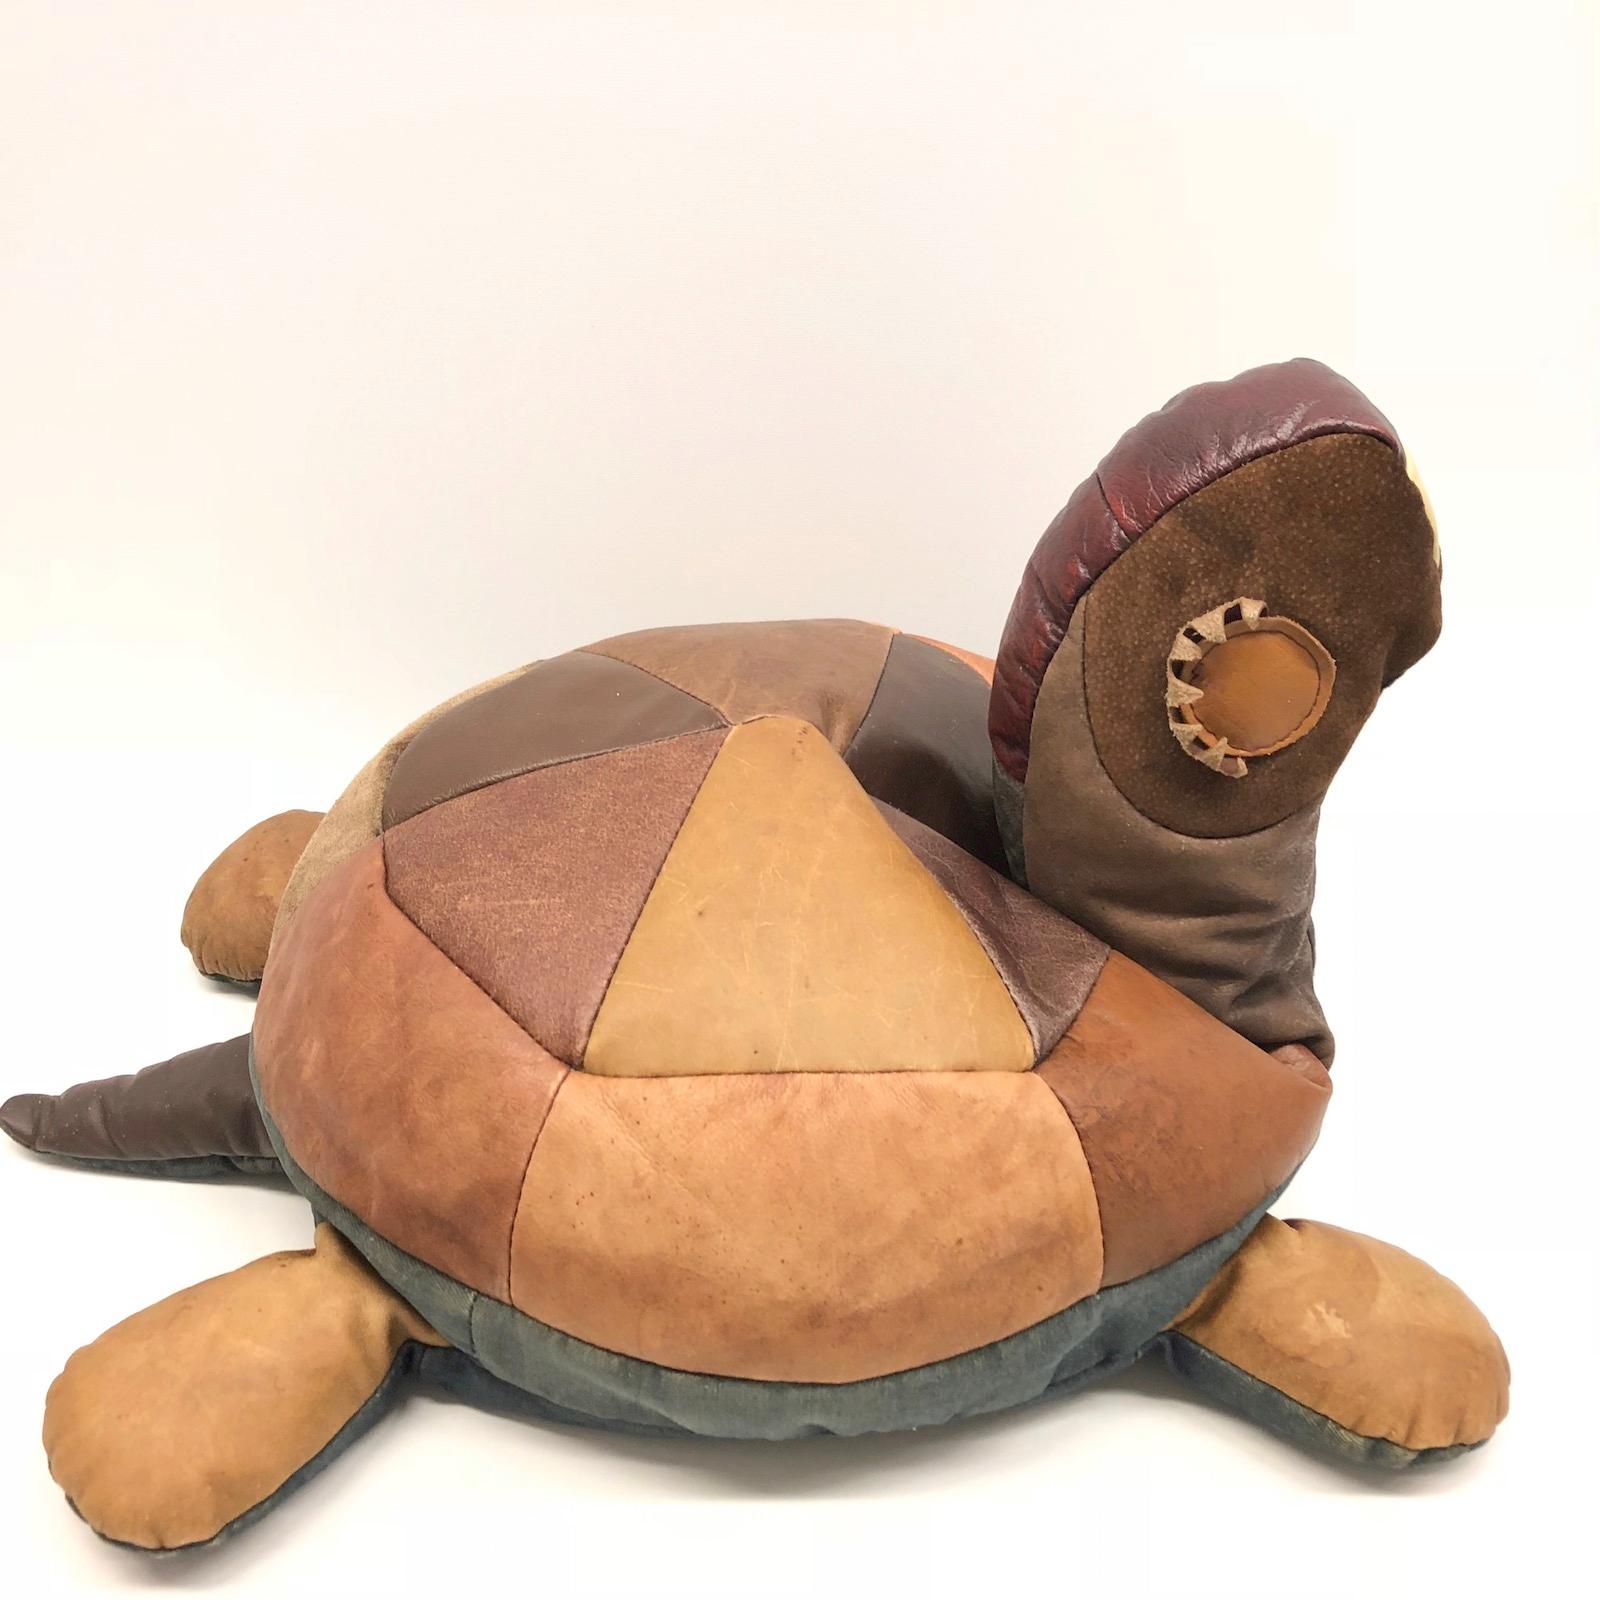 Turtle Animal Pouf Ottoman Footstool Poof Pouffe Mad of Leather, 1970s 1